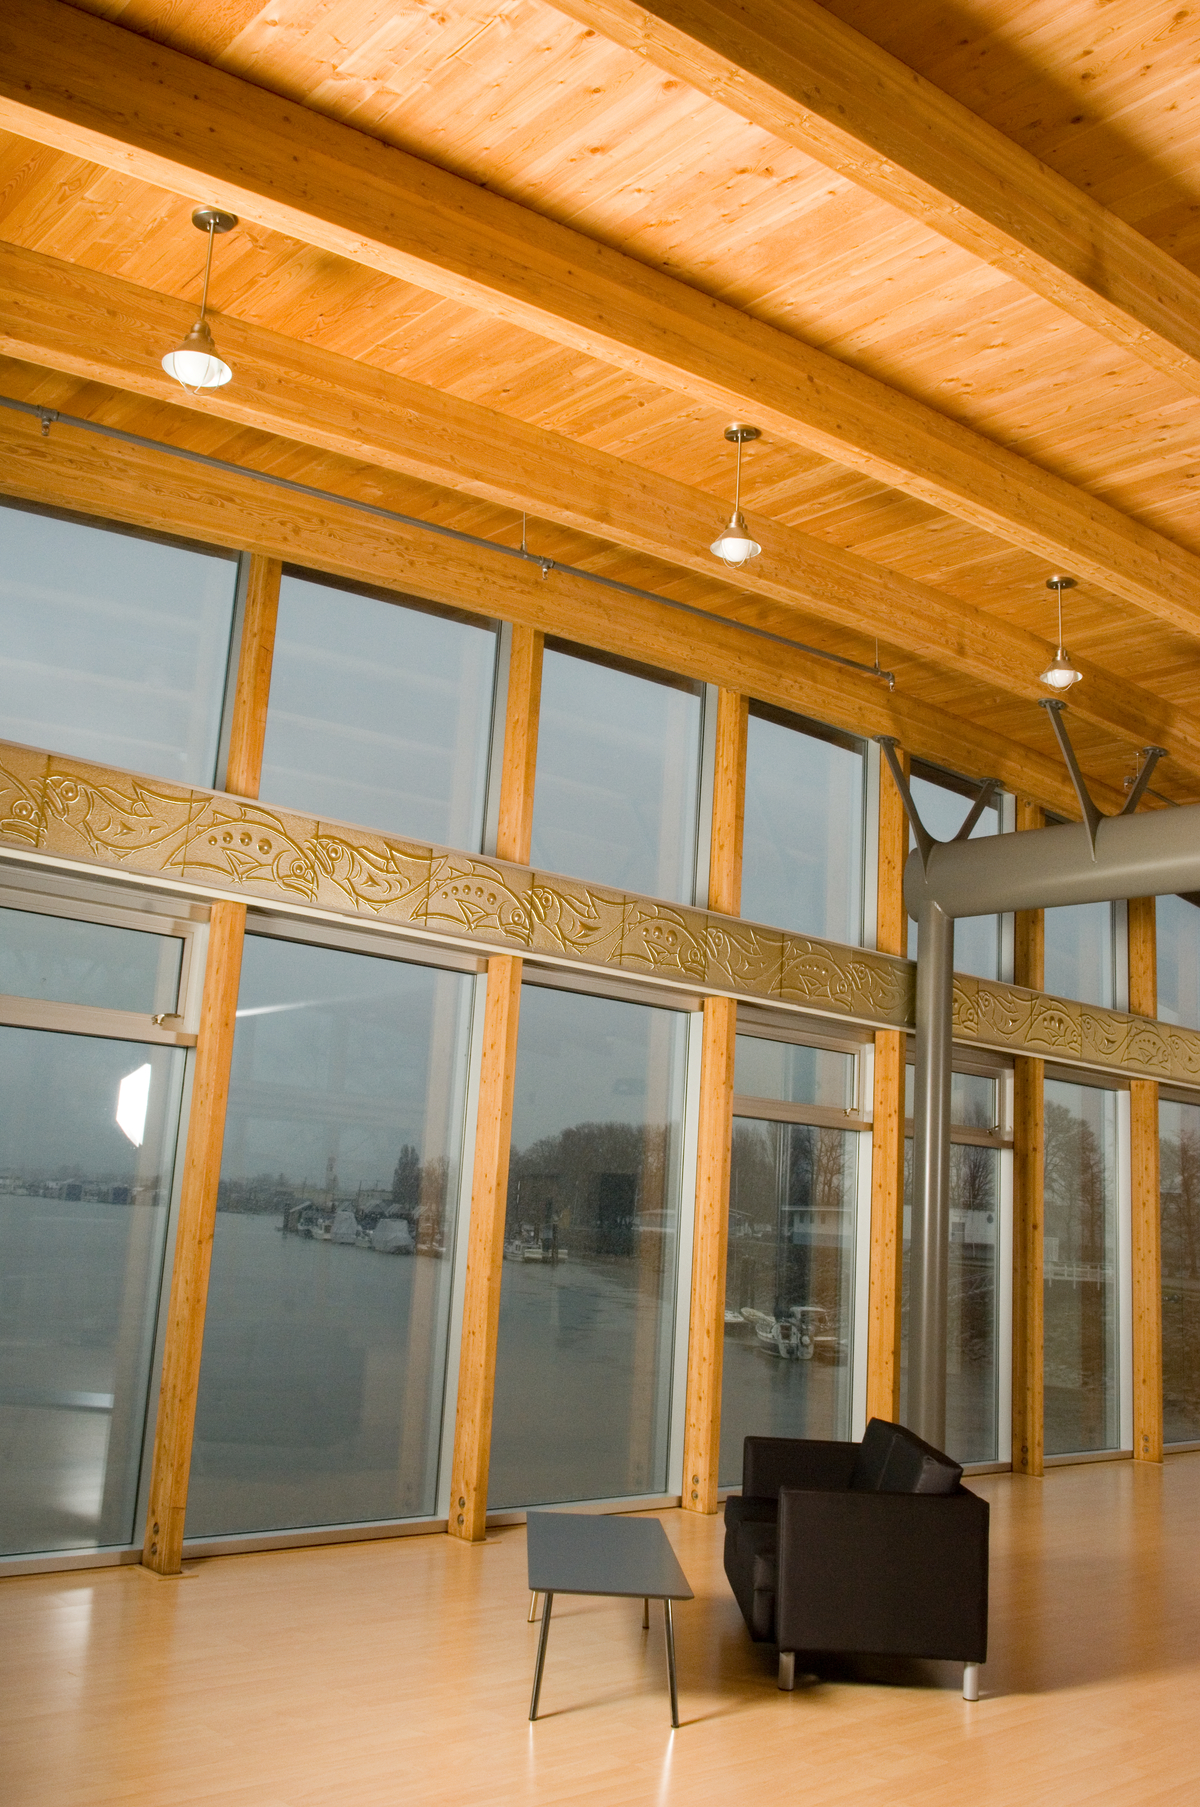 Interior close up daytime view of John M.S. Lecky UBC Boathouse ceiling and expansive glass exterior wall, showing a combination of steel, glue-laminated timber (glulam), and lumber light frame roofing construction